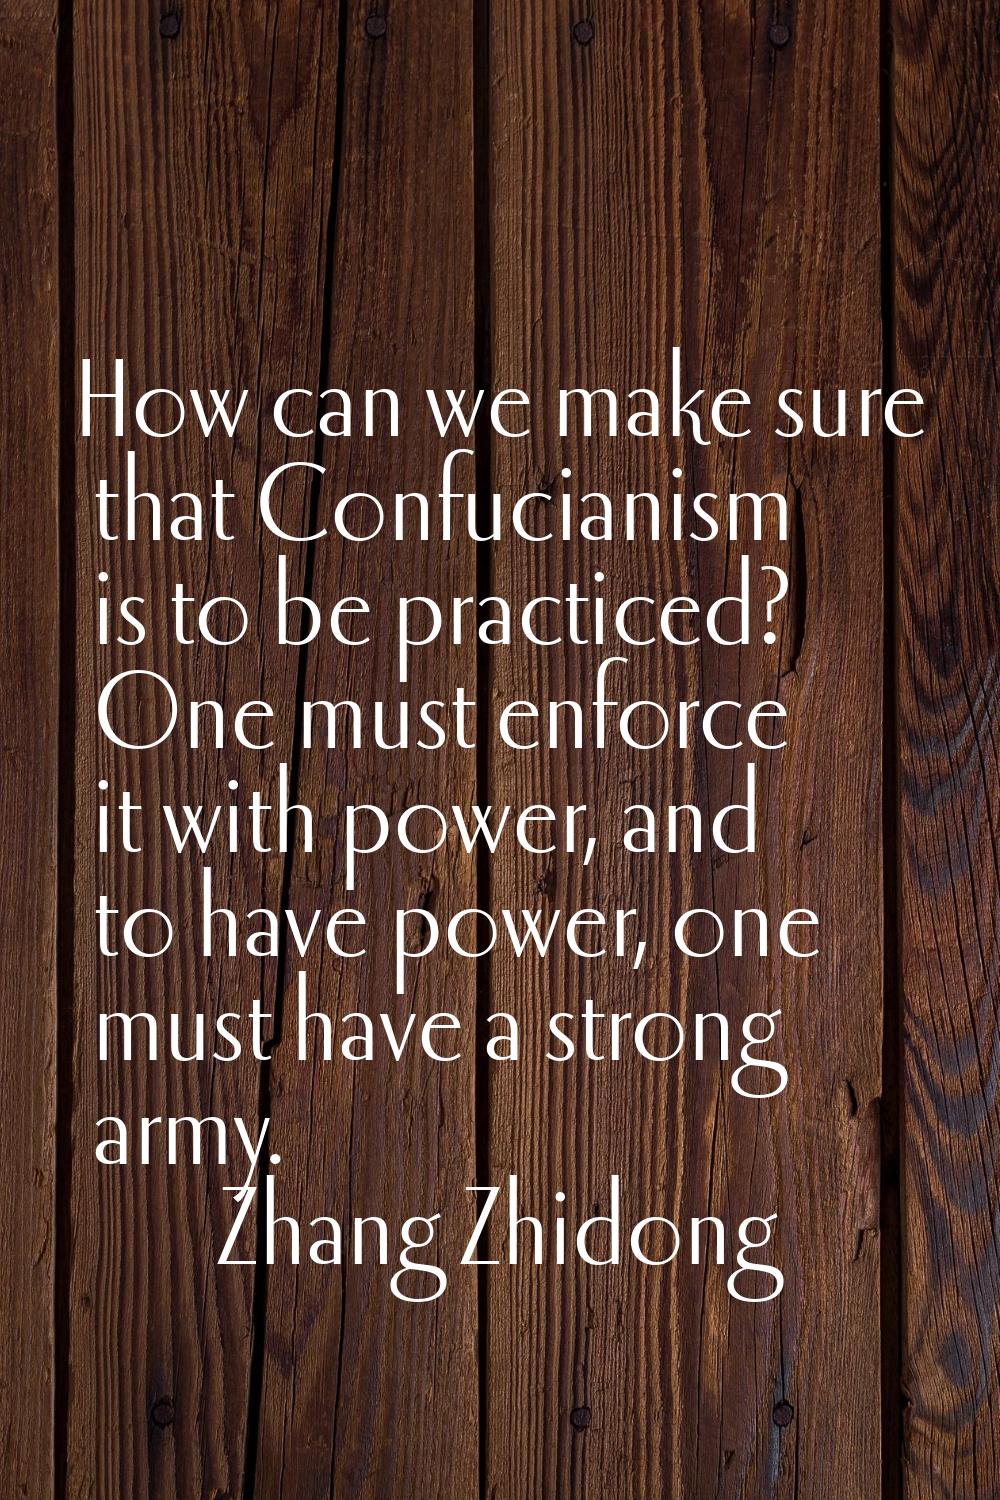 How can we make sure that Confucianism is to be practiced? One must enforce it with power, and to h